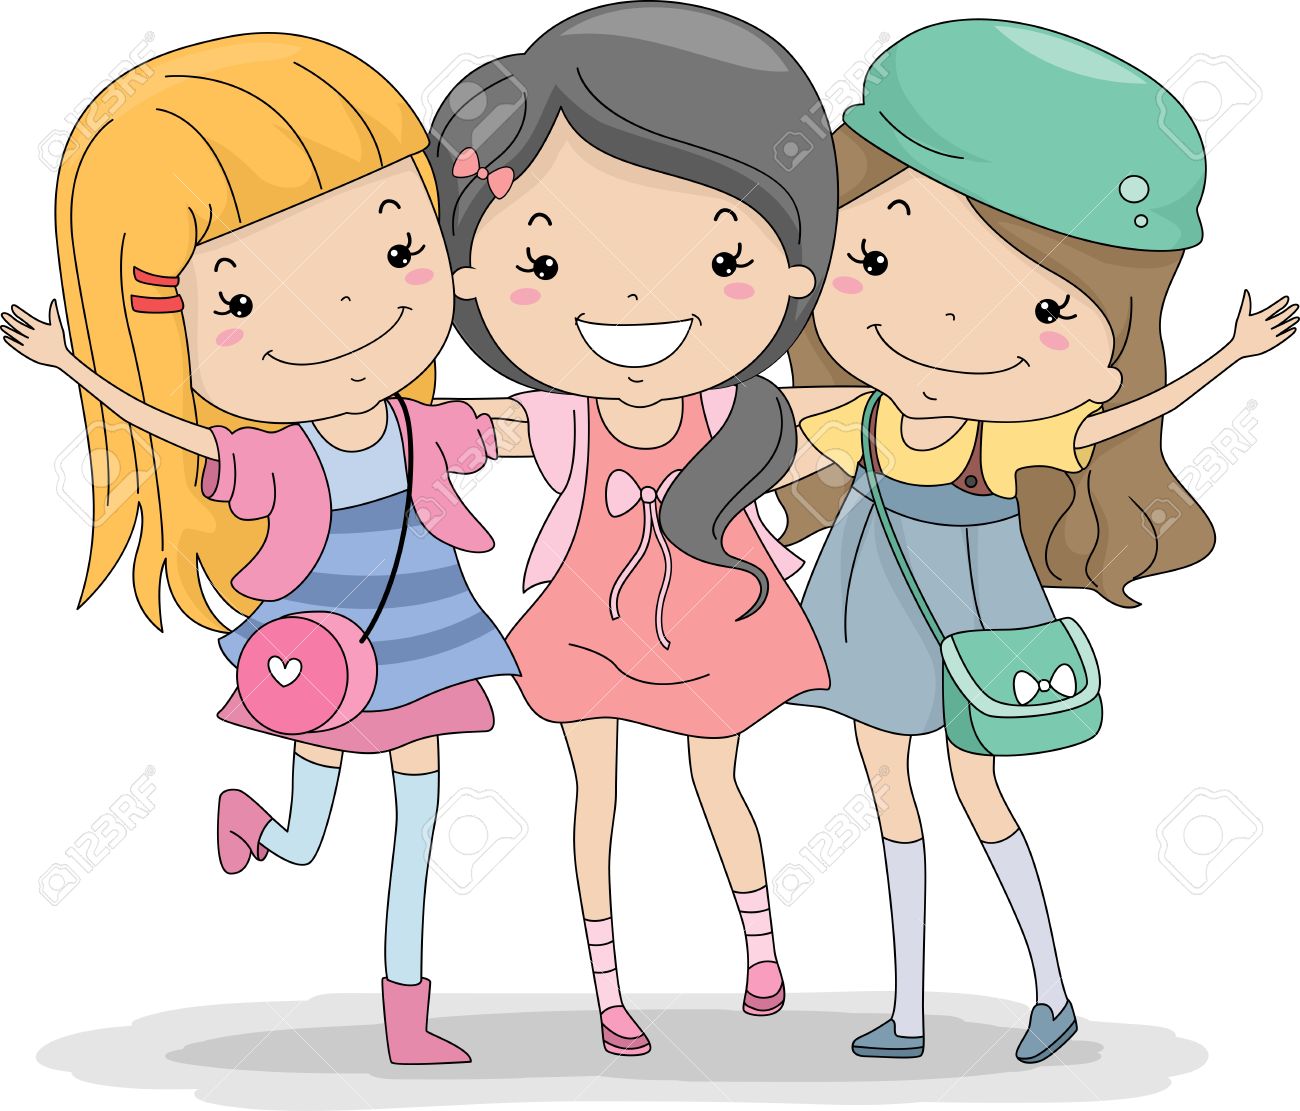 Free Cartoon Friendship Images, Download Free Cartoon Friendship Images